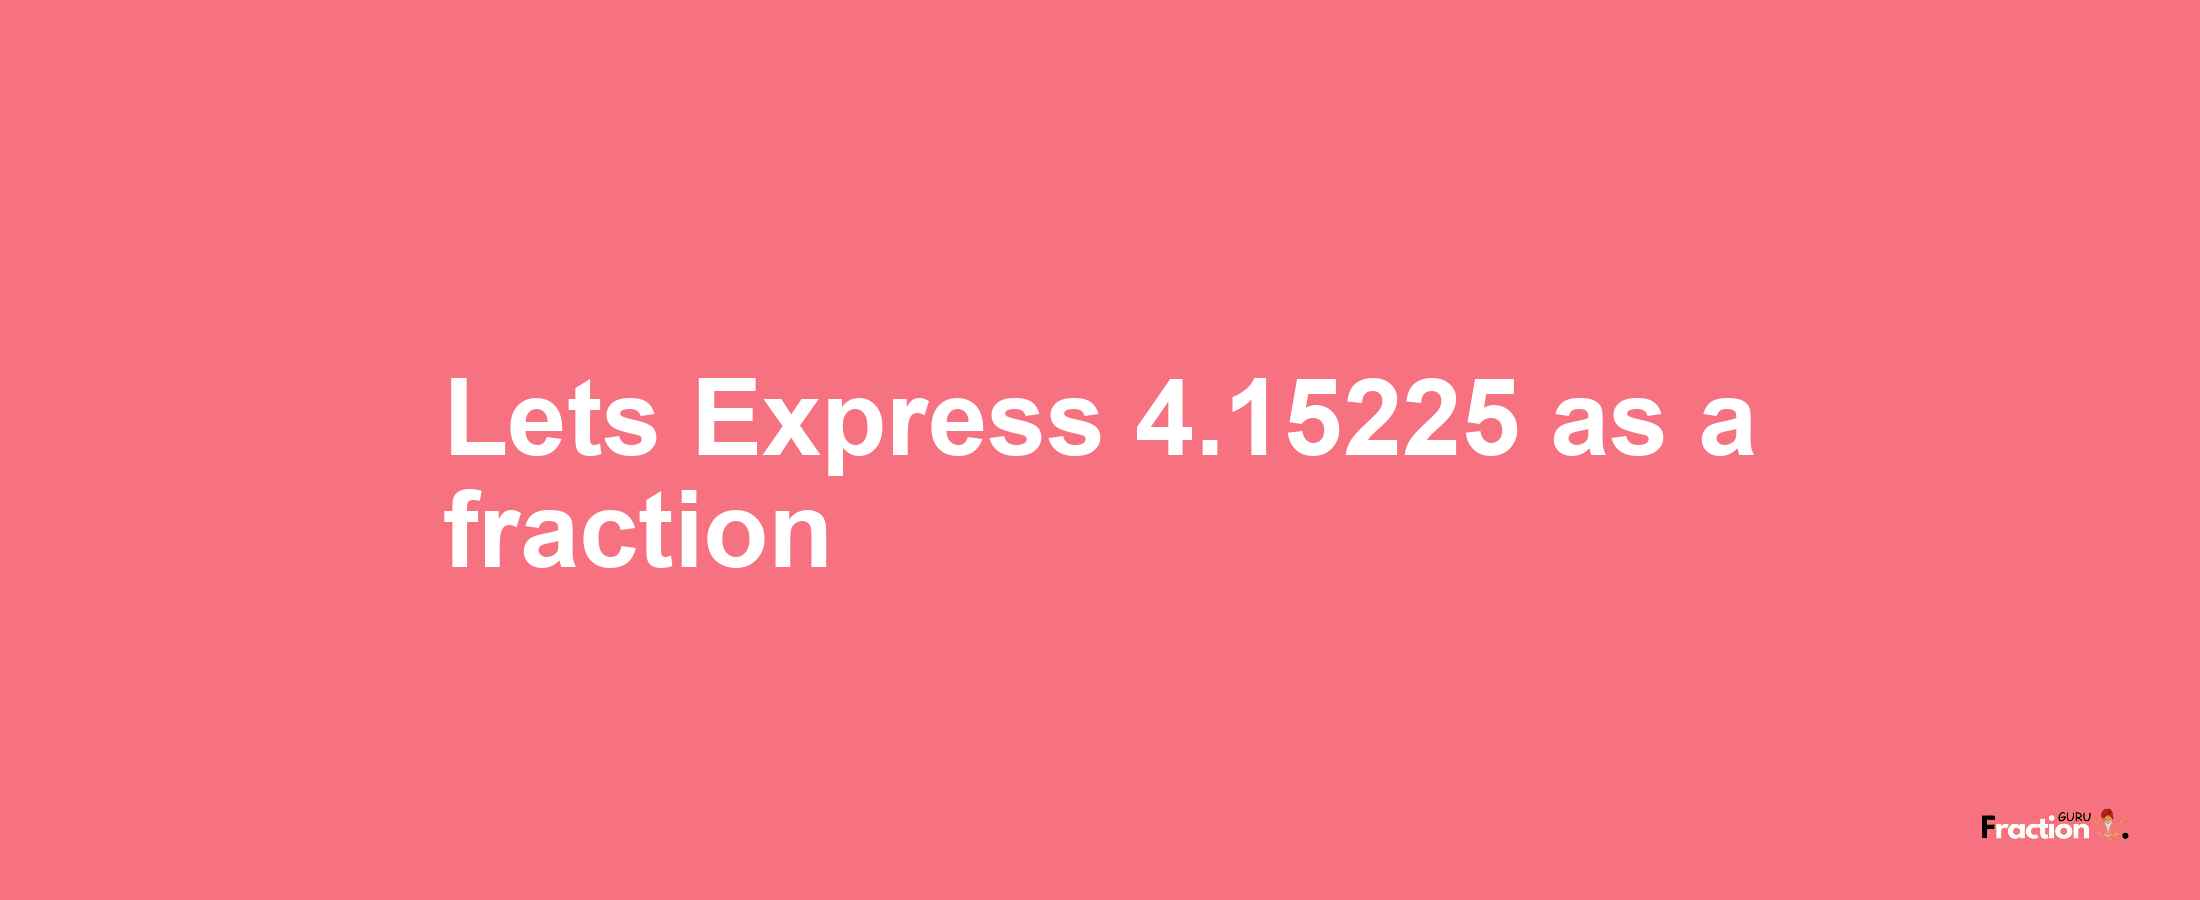 Lets Express 4.15225 as afraction